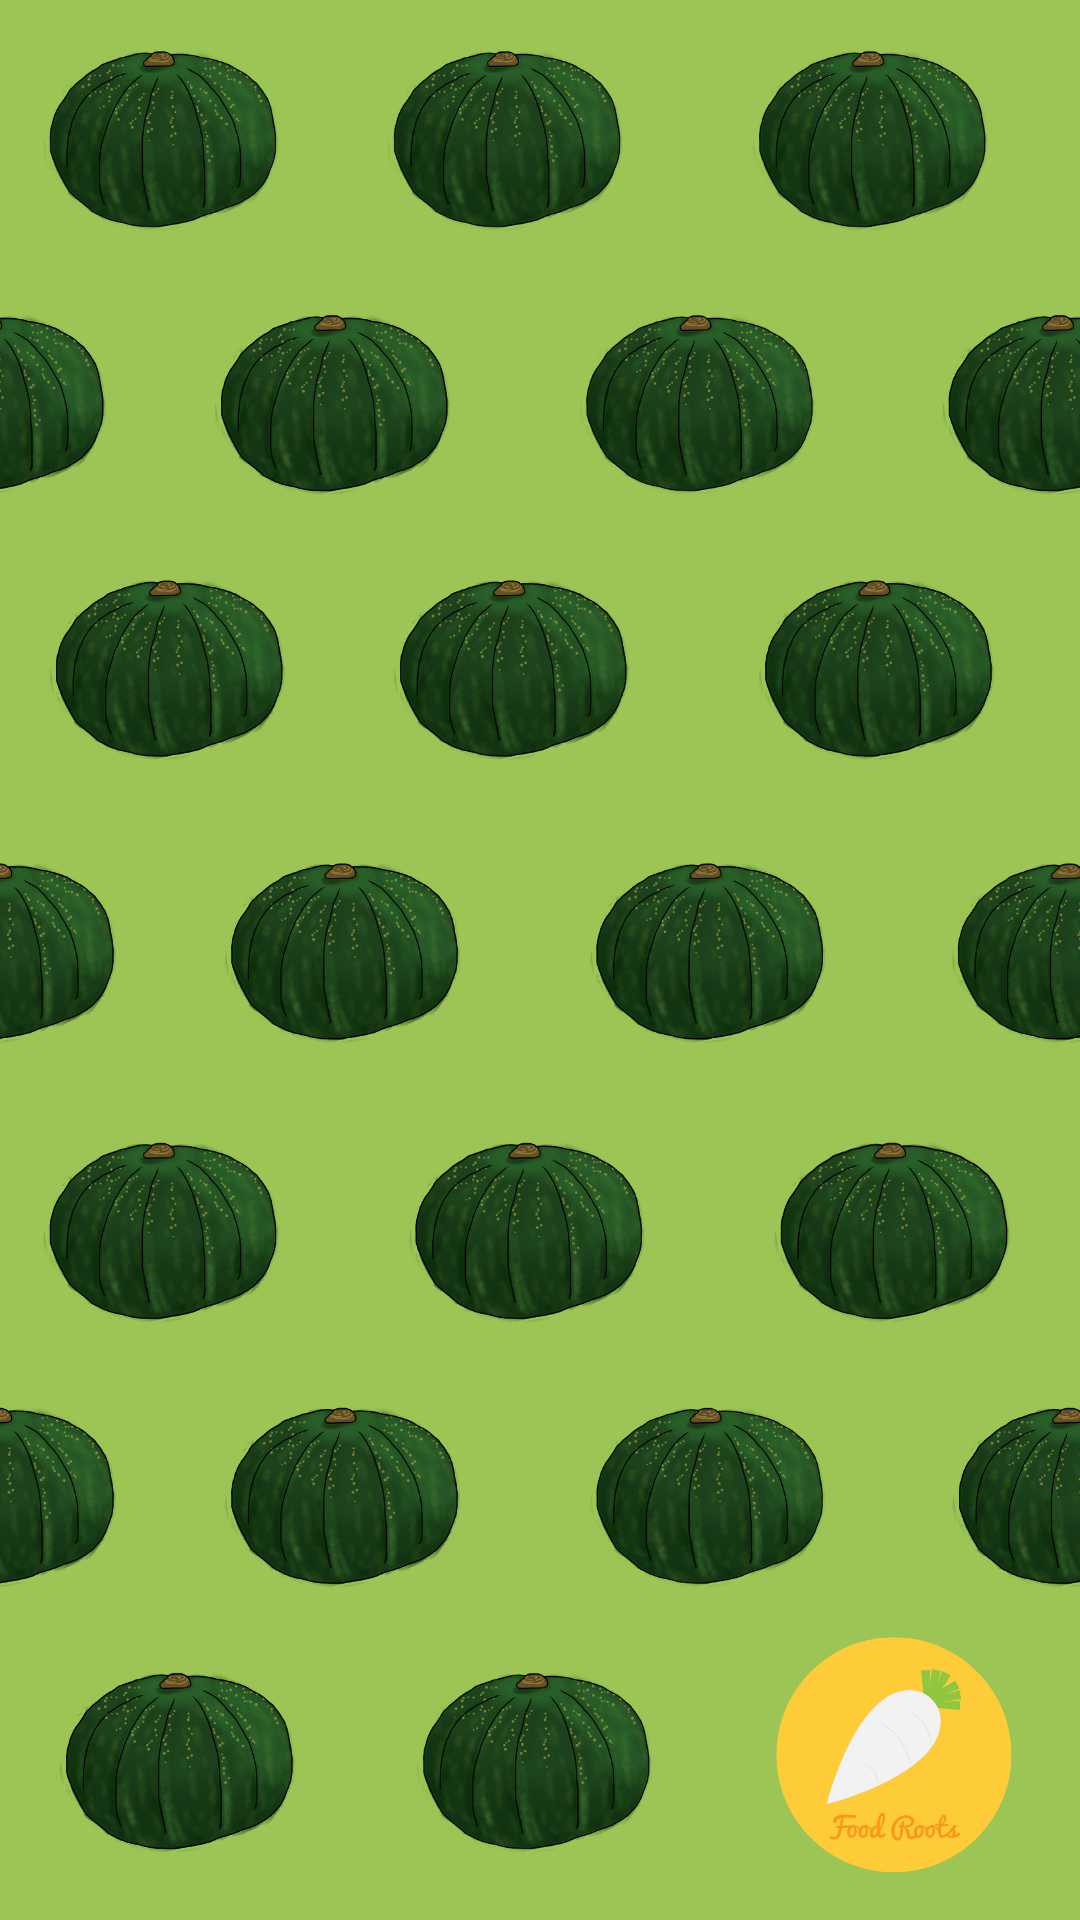 A green background with illustrations of Kabocha squash in a pattern. - Food